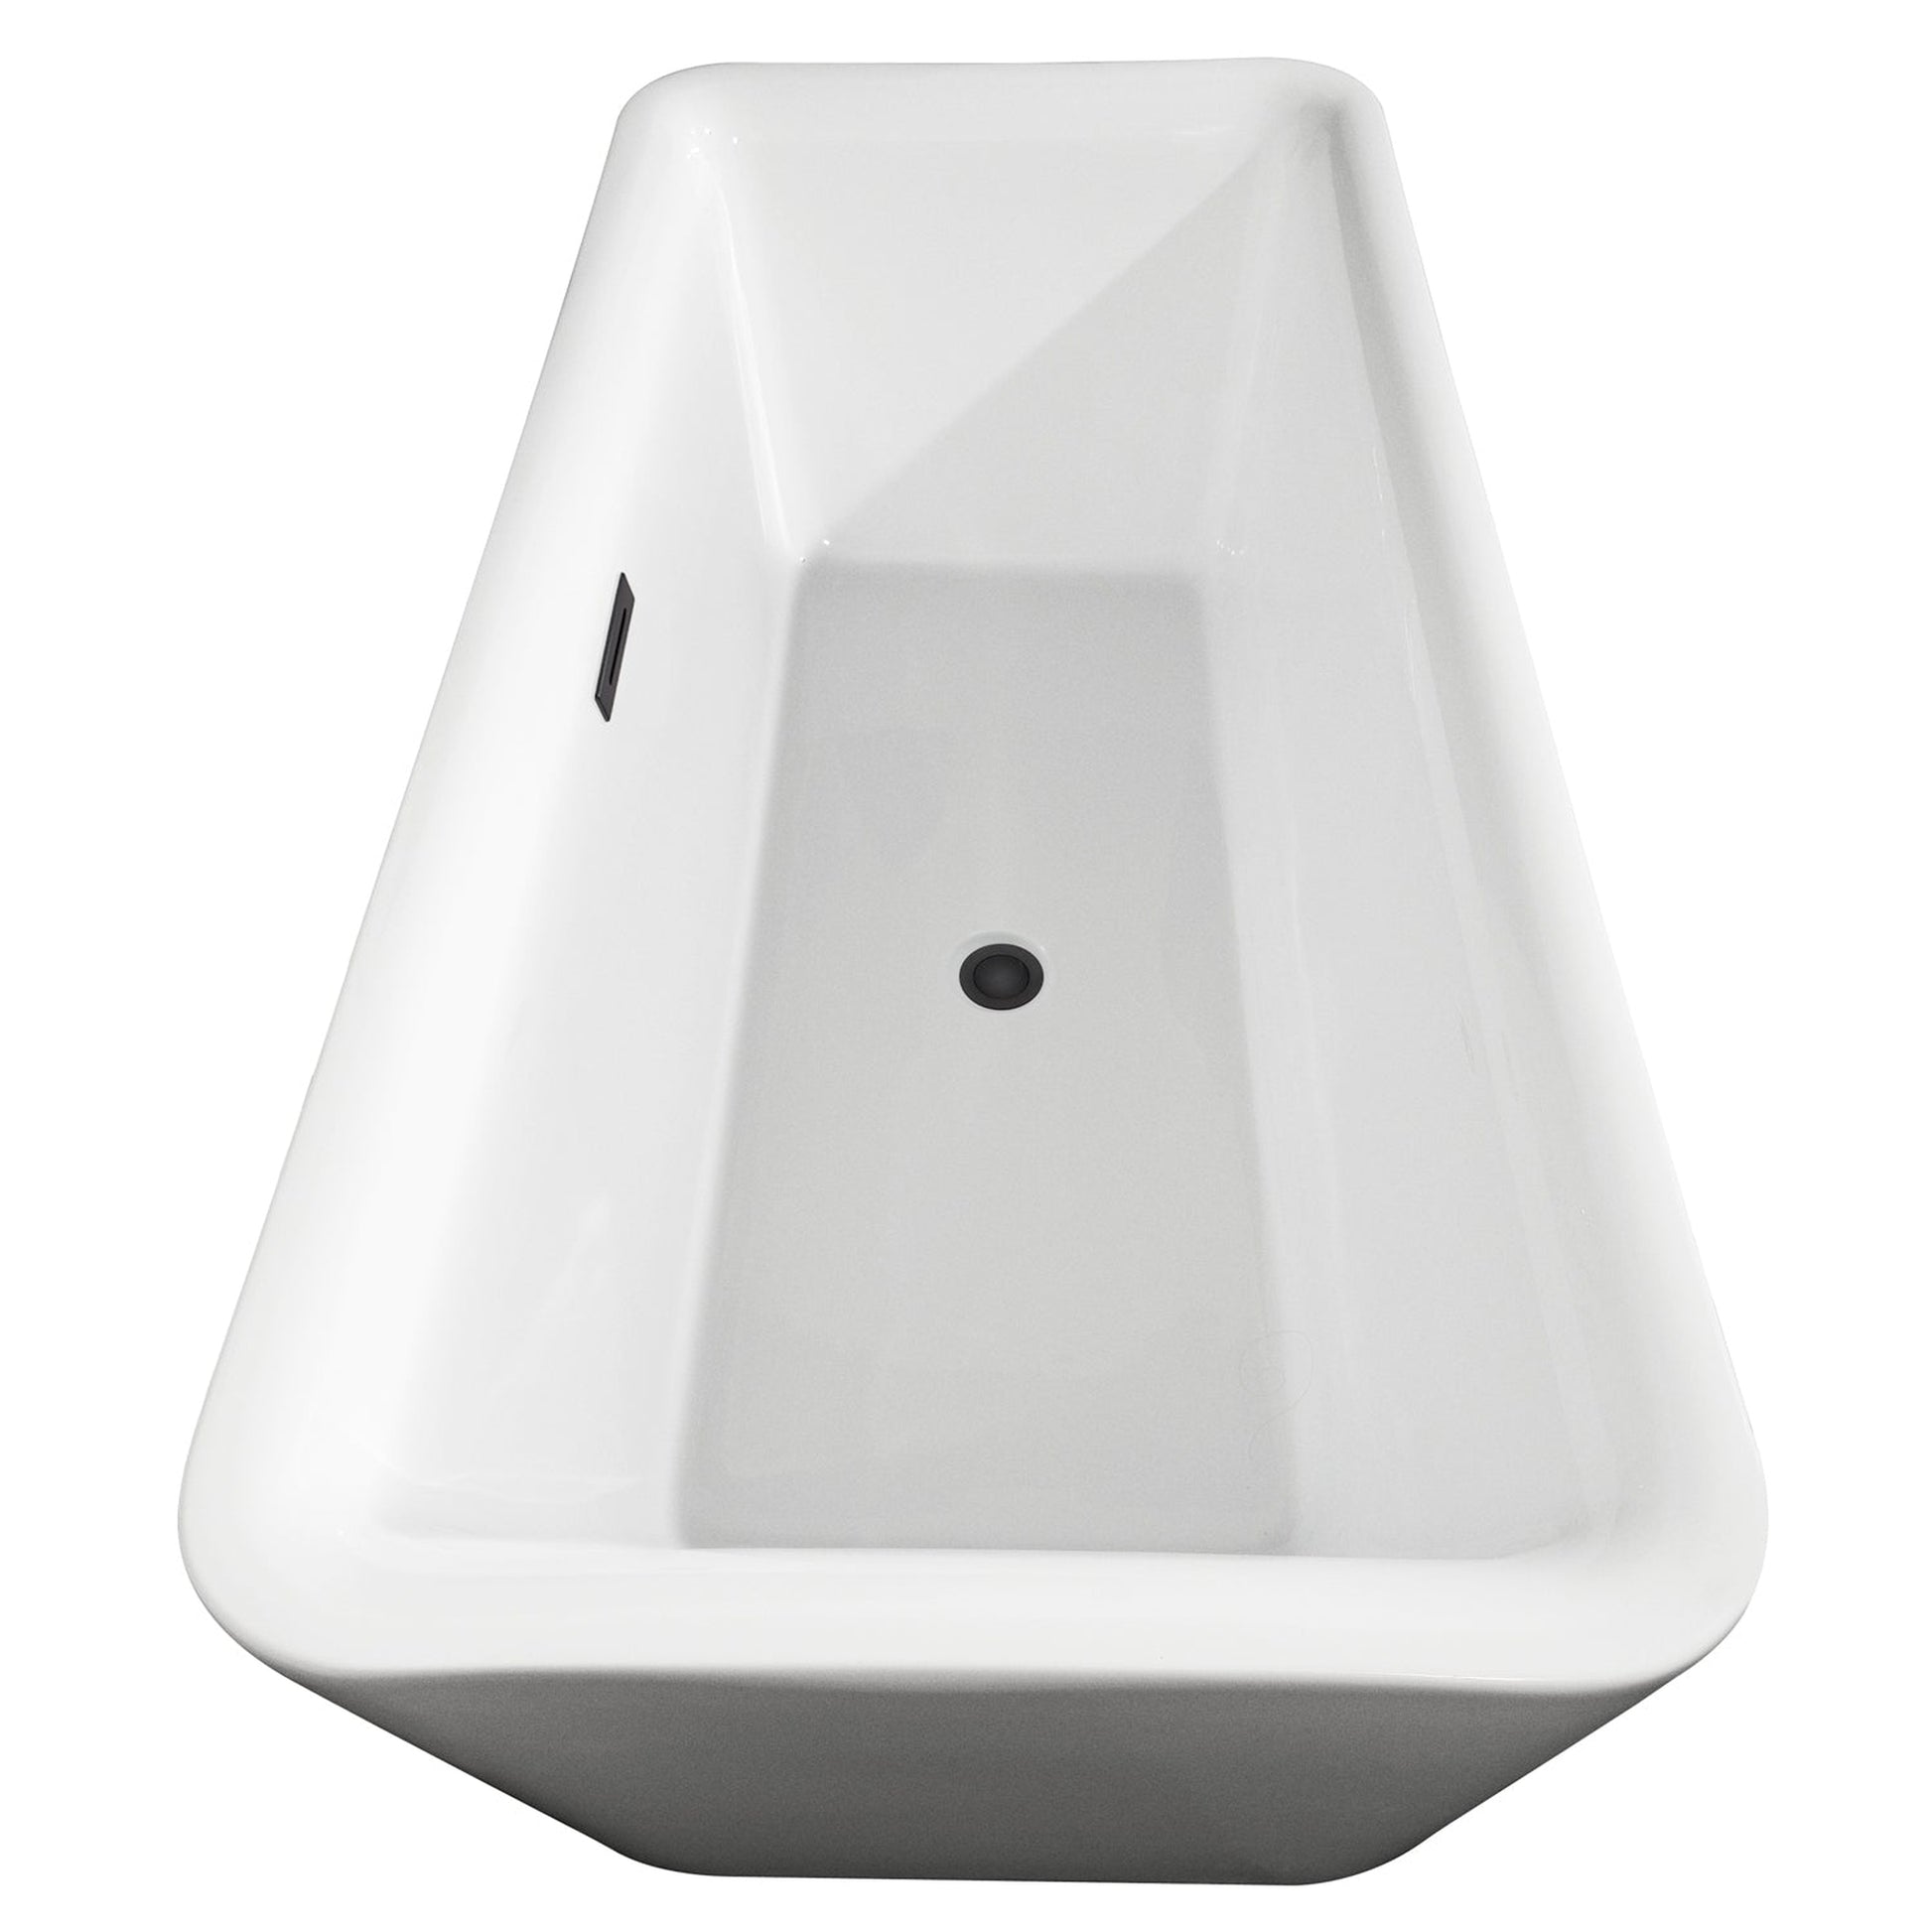 Wyndham Collection Emily 69" Freestanding Bathtub in White With Floor Mounted Faucet, Drain and Overflow Trim in Matte Black